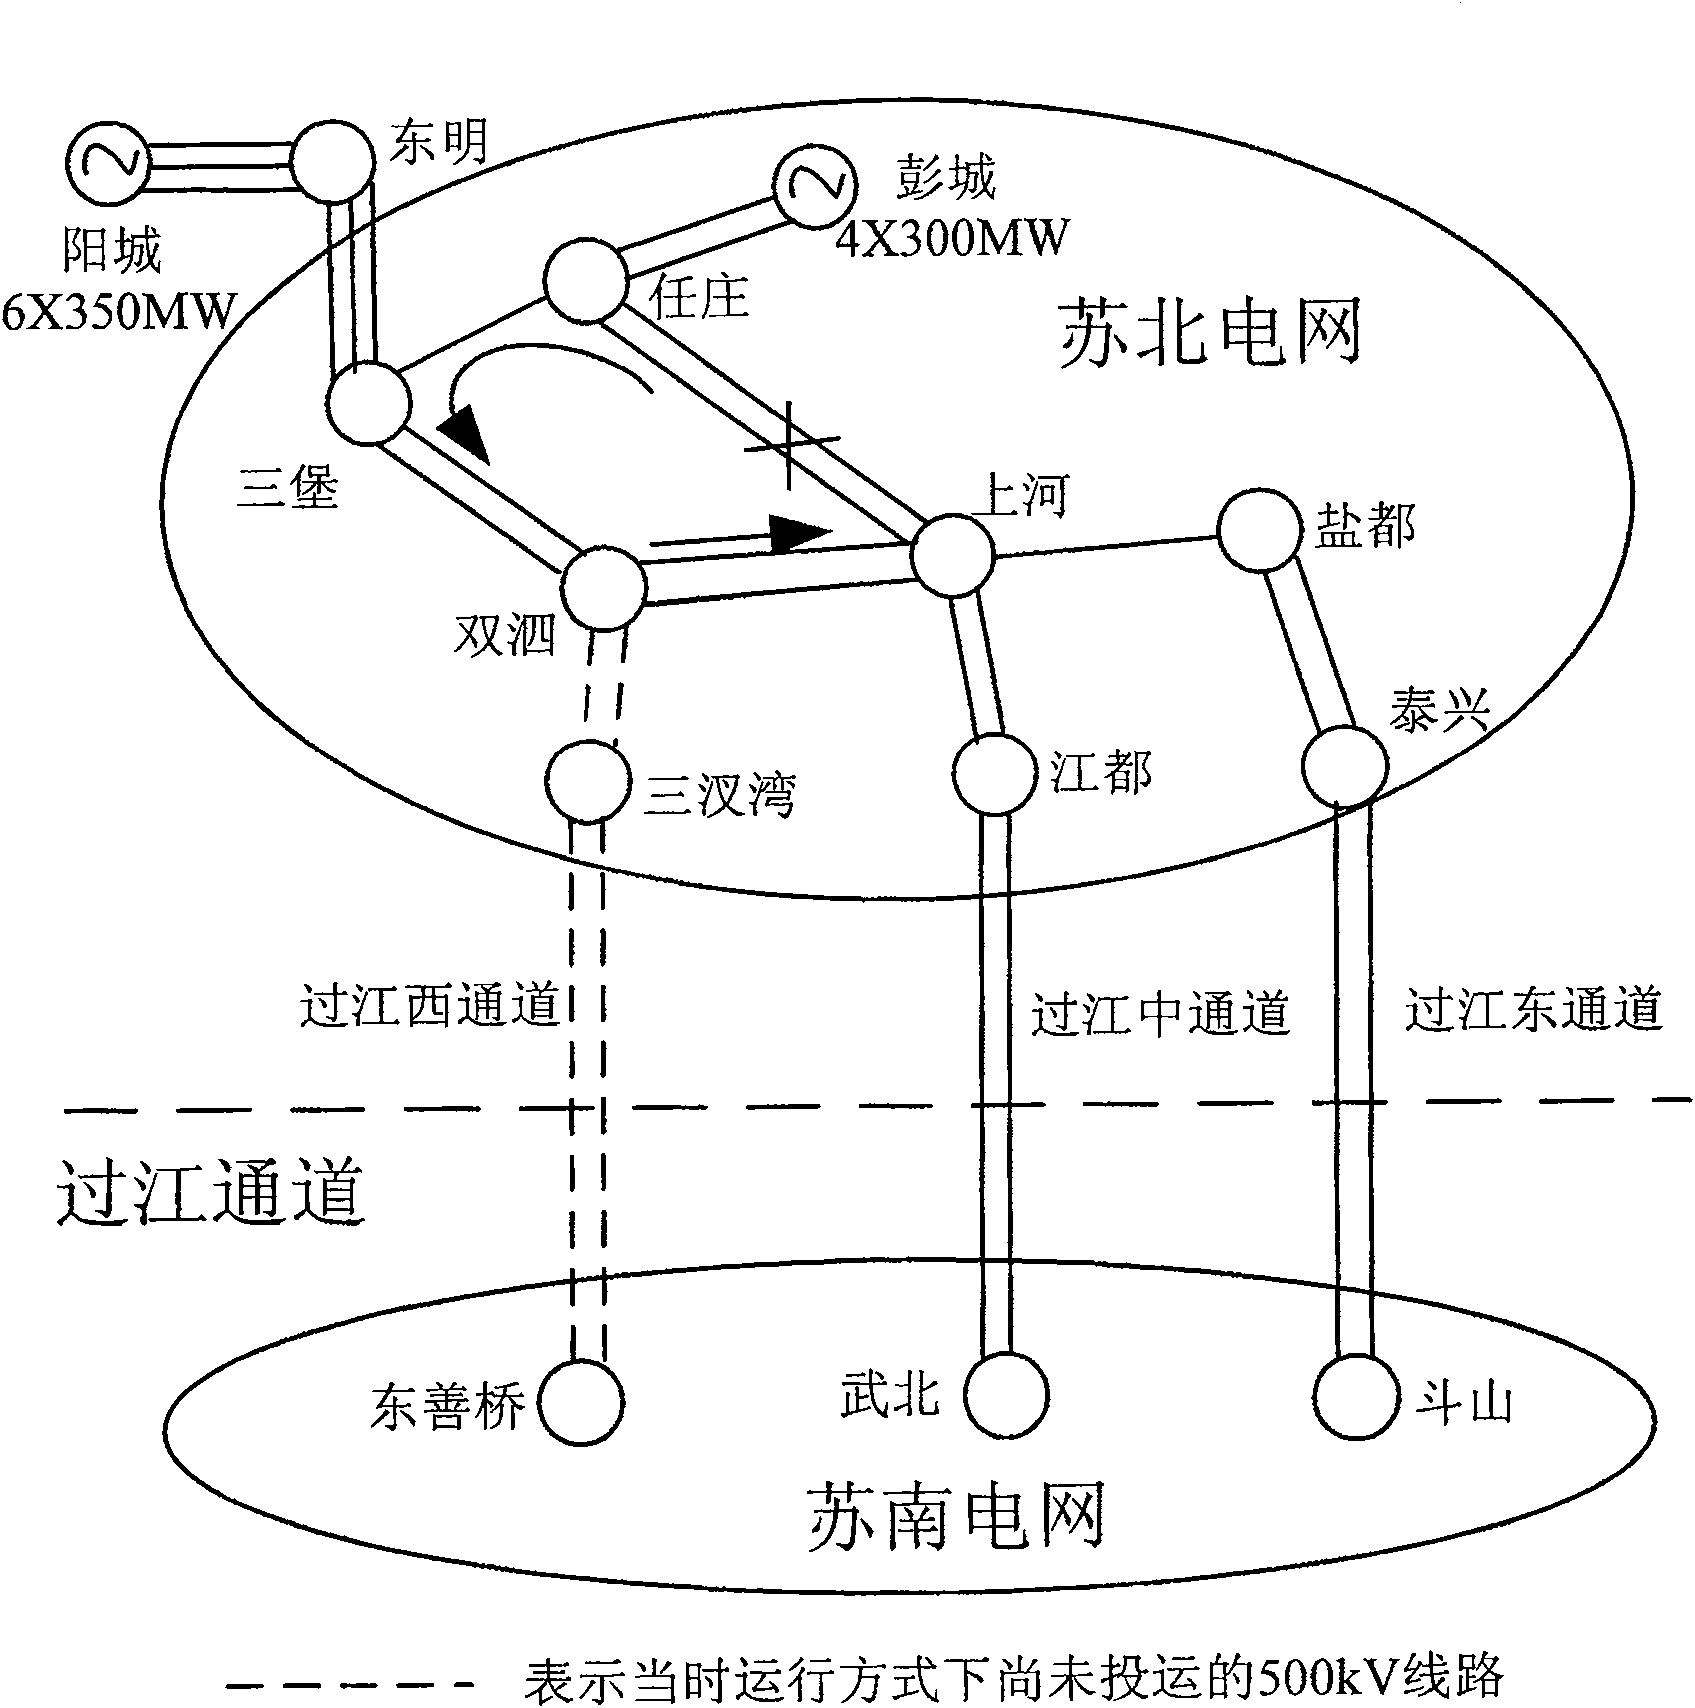 Closed-loop self-adaption emergency control method for large electric network 'centralized coordination, layered control'